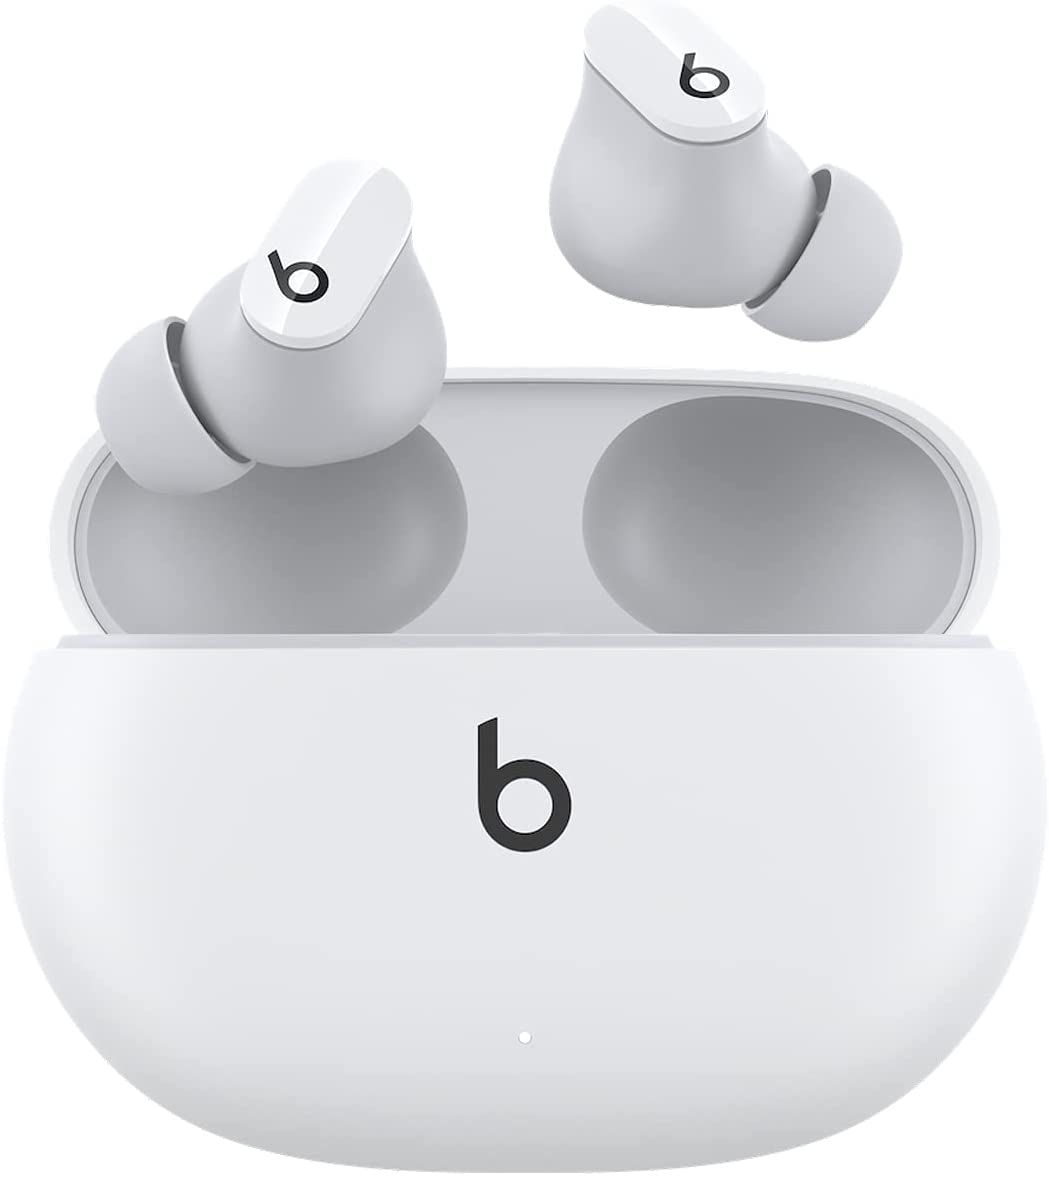 Beats Studio Buds Totally Wireless Noise Cancelling Earphones - White (Certified Refurbished)